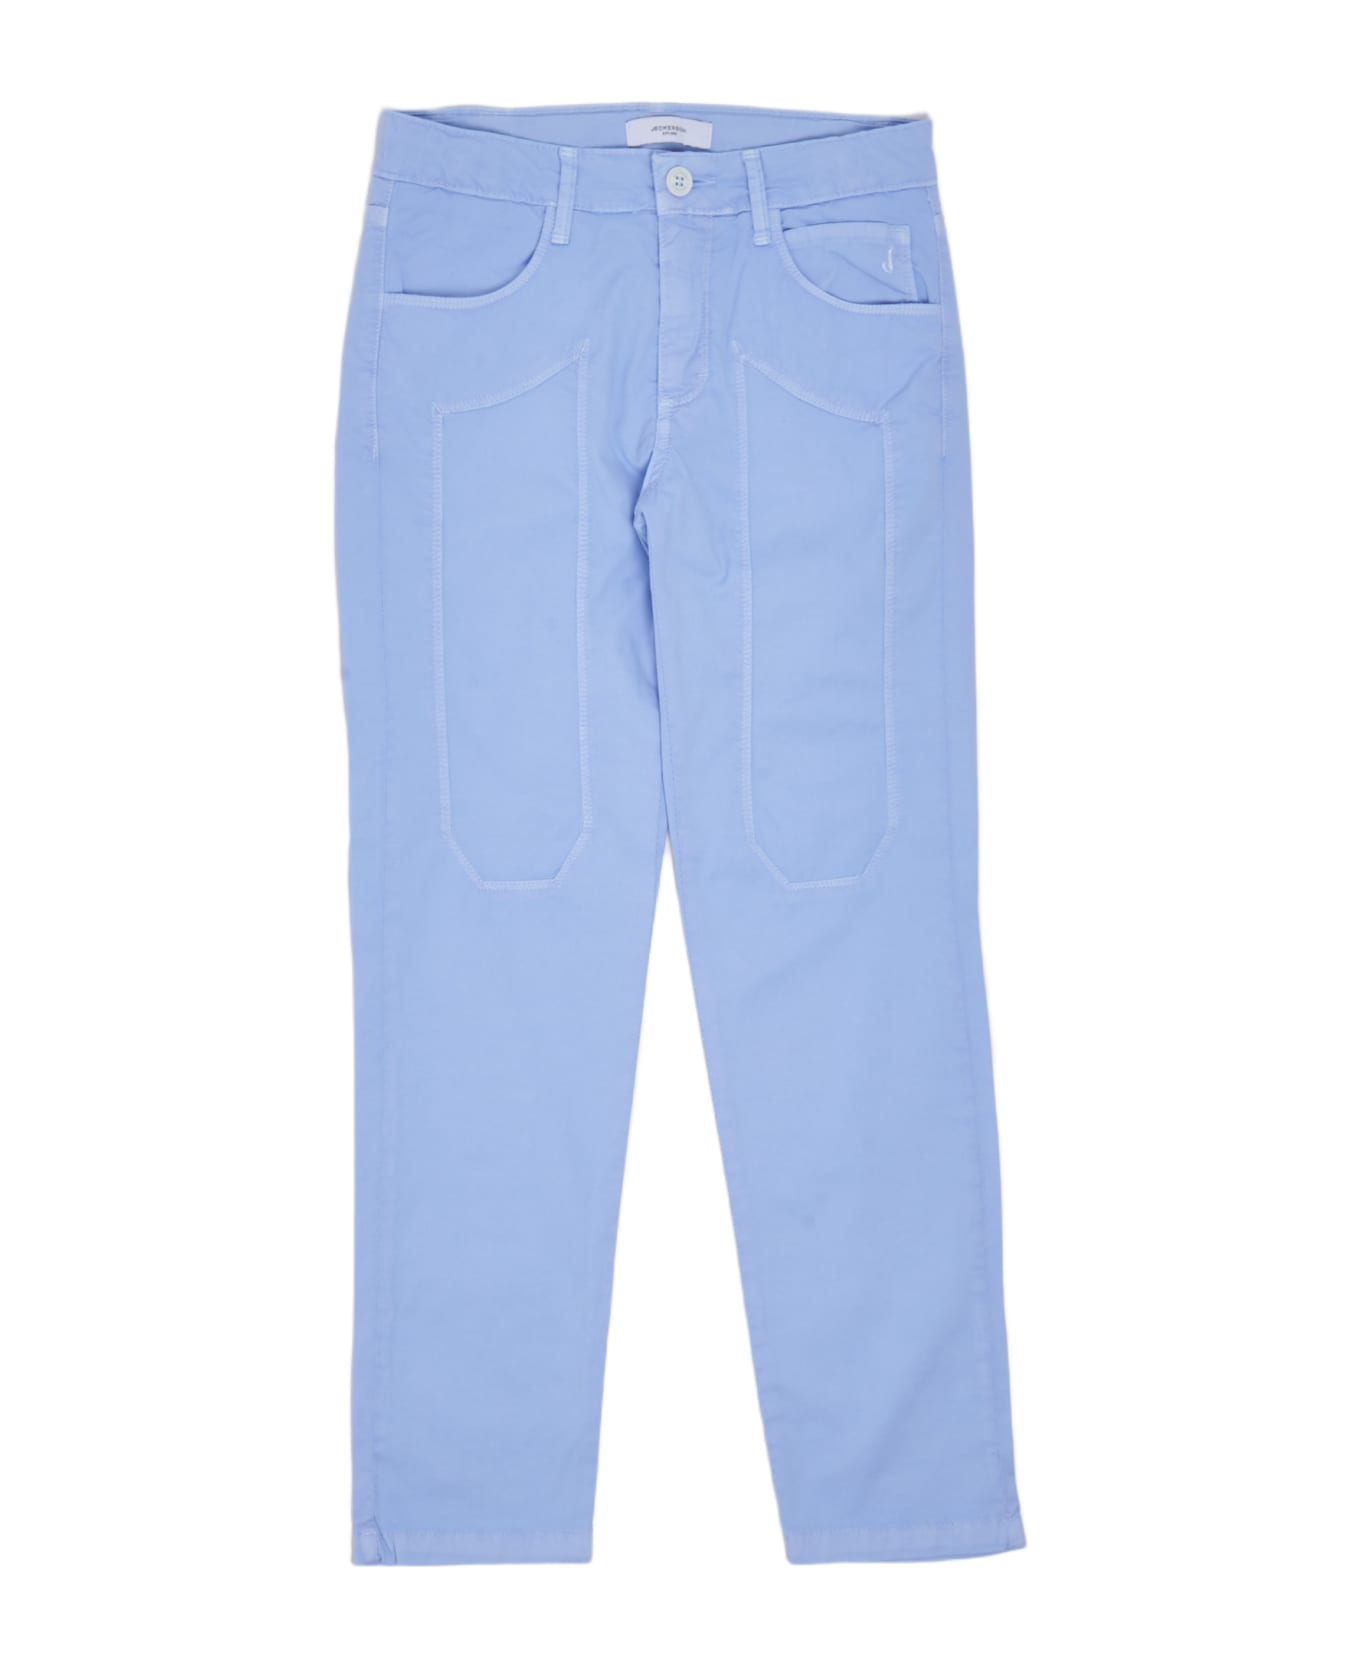 Jeckerson Trousers Trousers - CIELO ボトムス